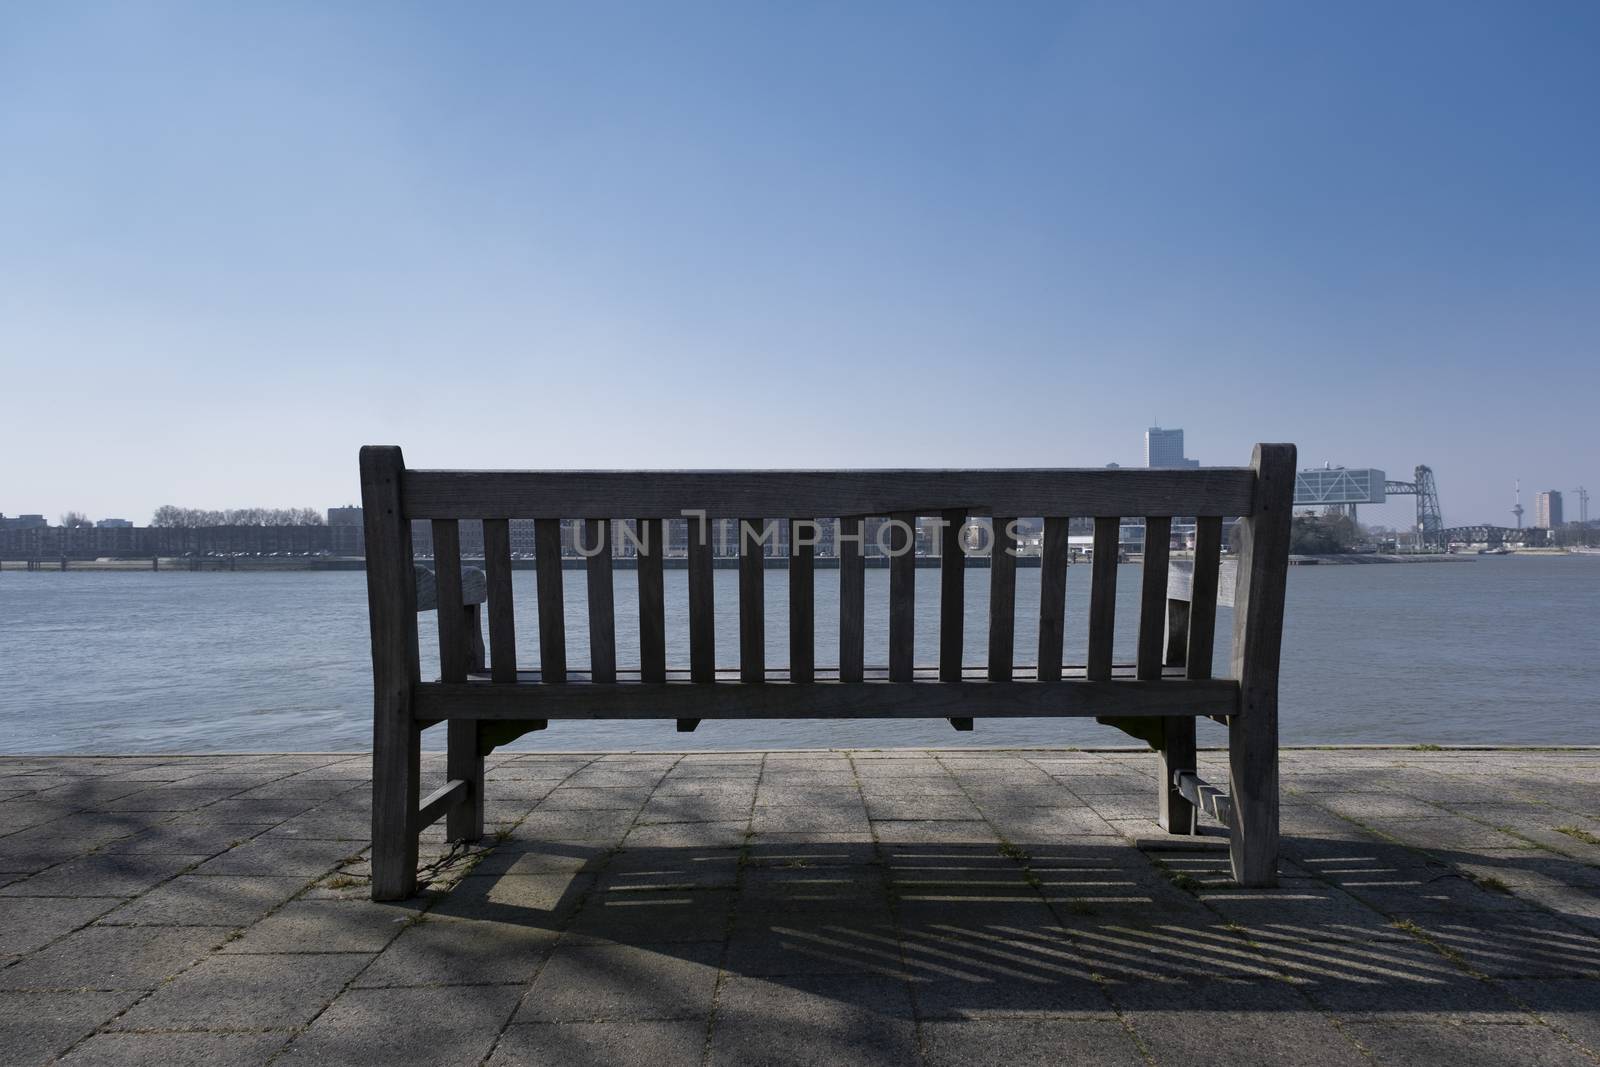 Bench seat in the city of rotterdam with river view by Tjeerdkruse